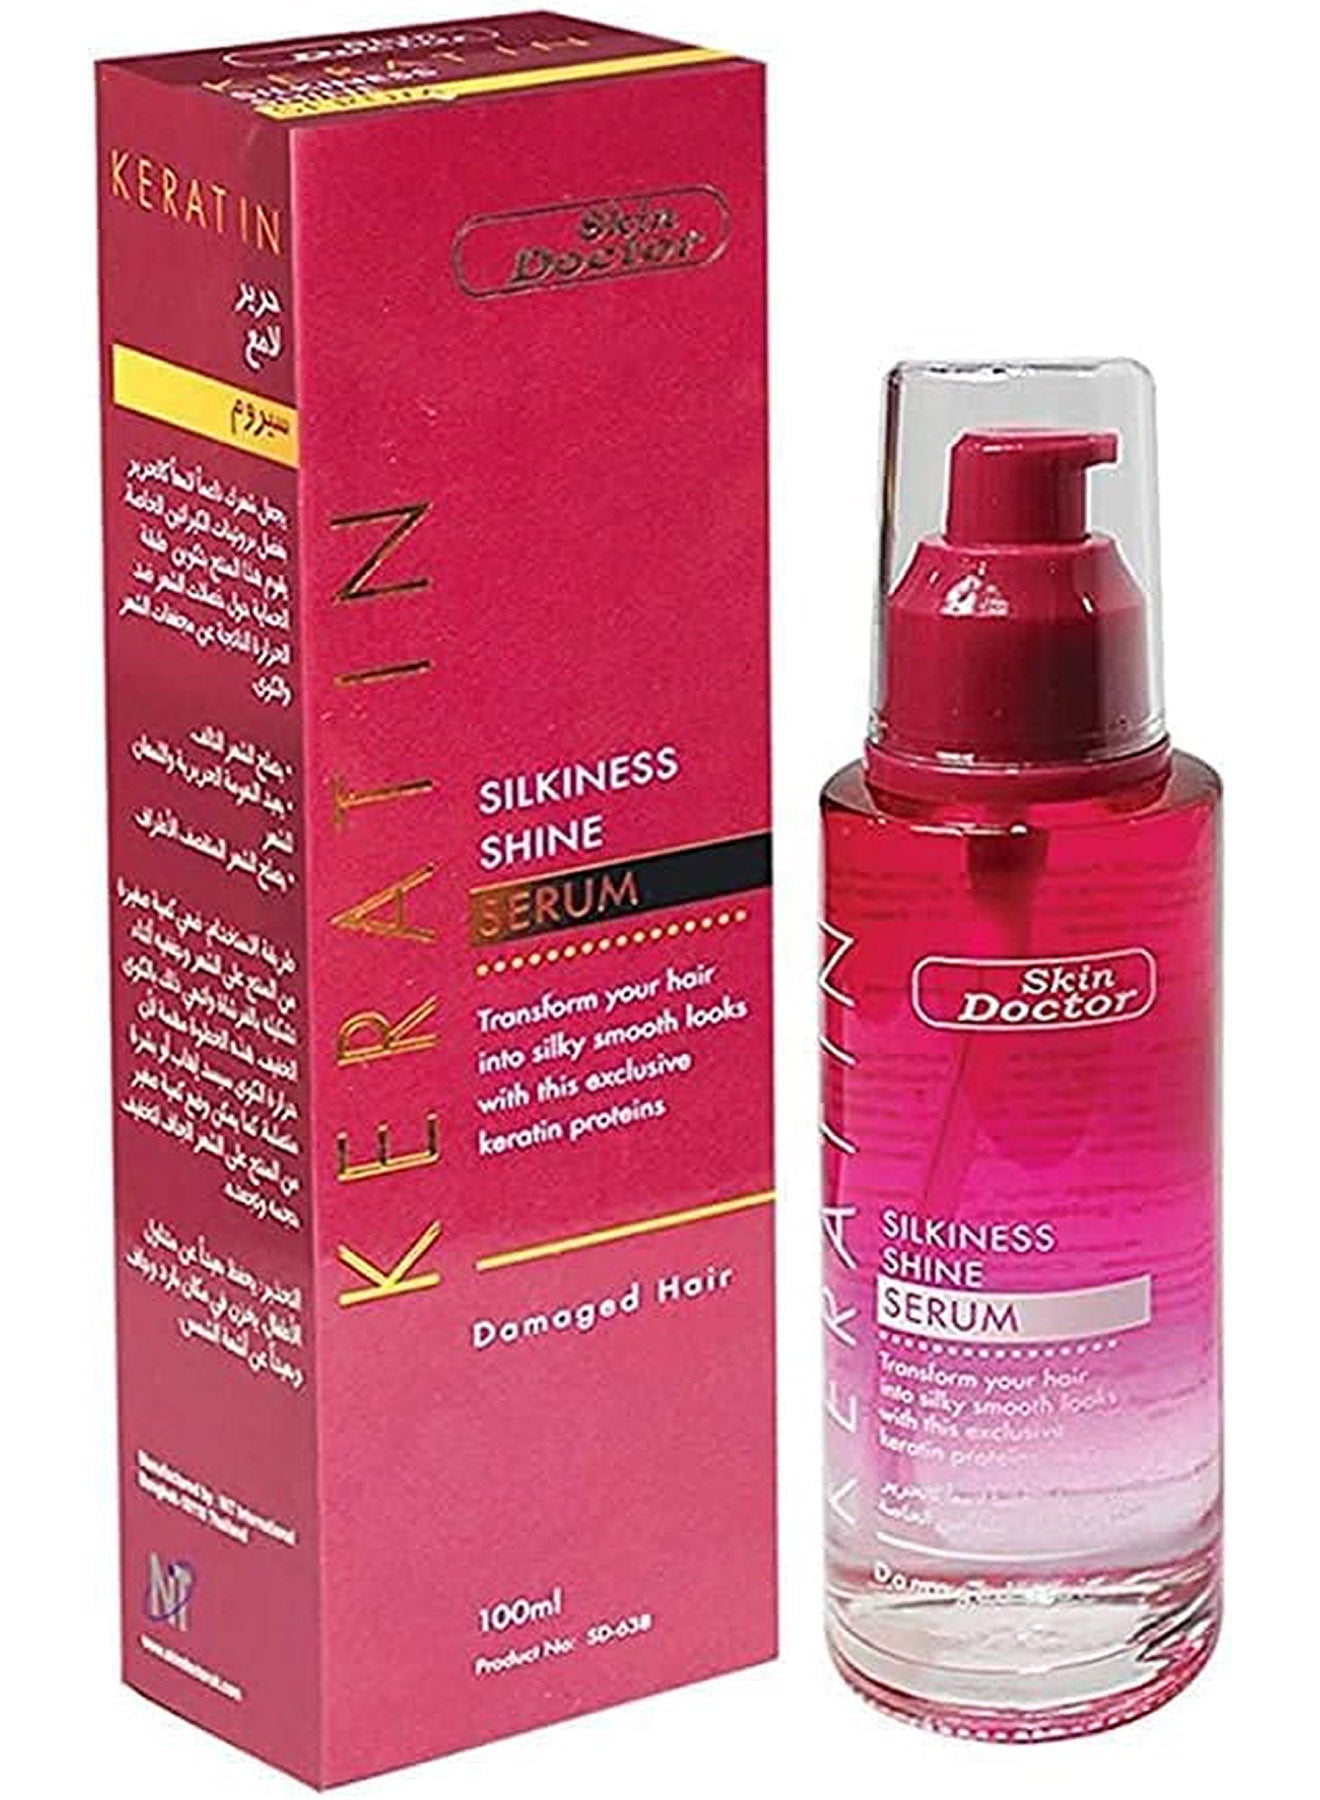 Skin Doctor Keratin Silky and Natural Shine Hair Serum 100 ml Value Pack of 2 